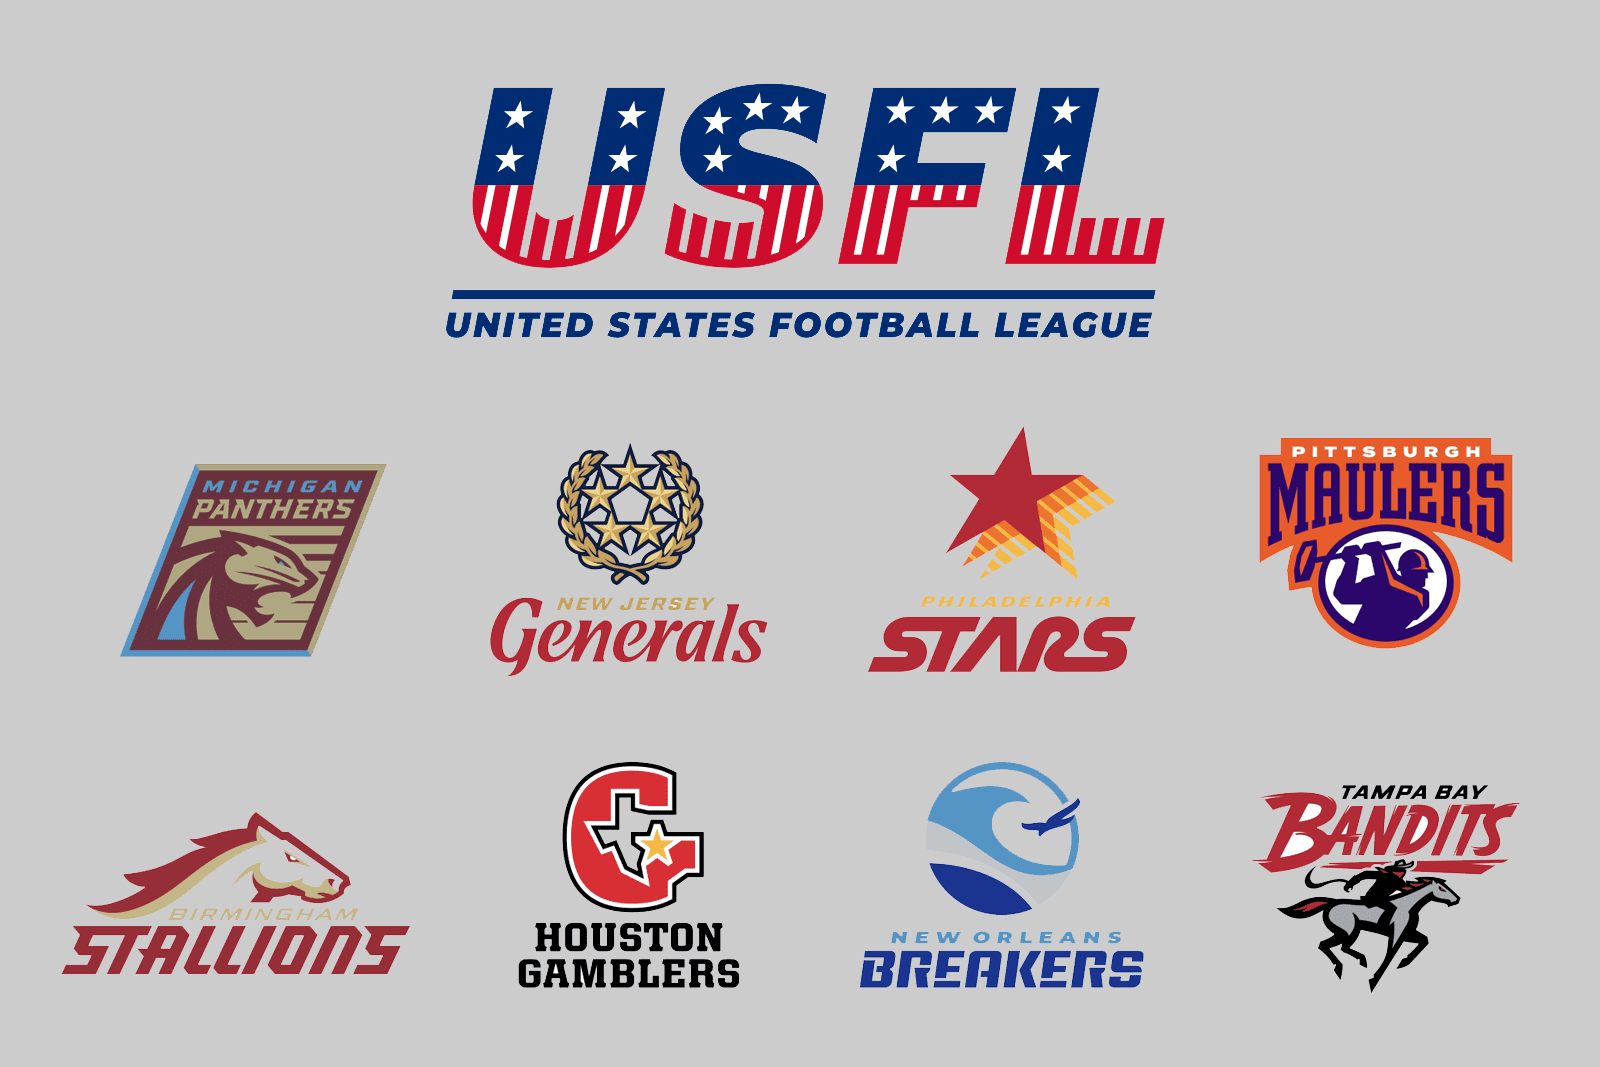 Building the League of the Future - Suggestions for the USFL